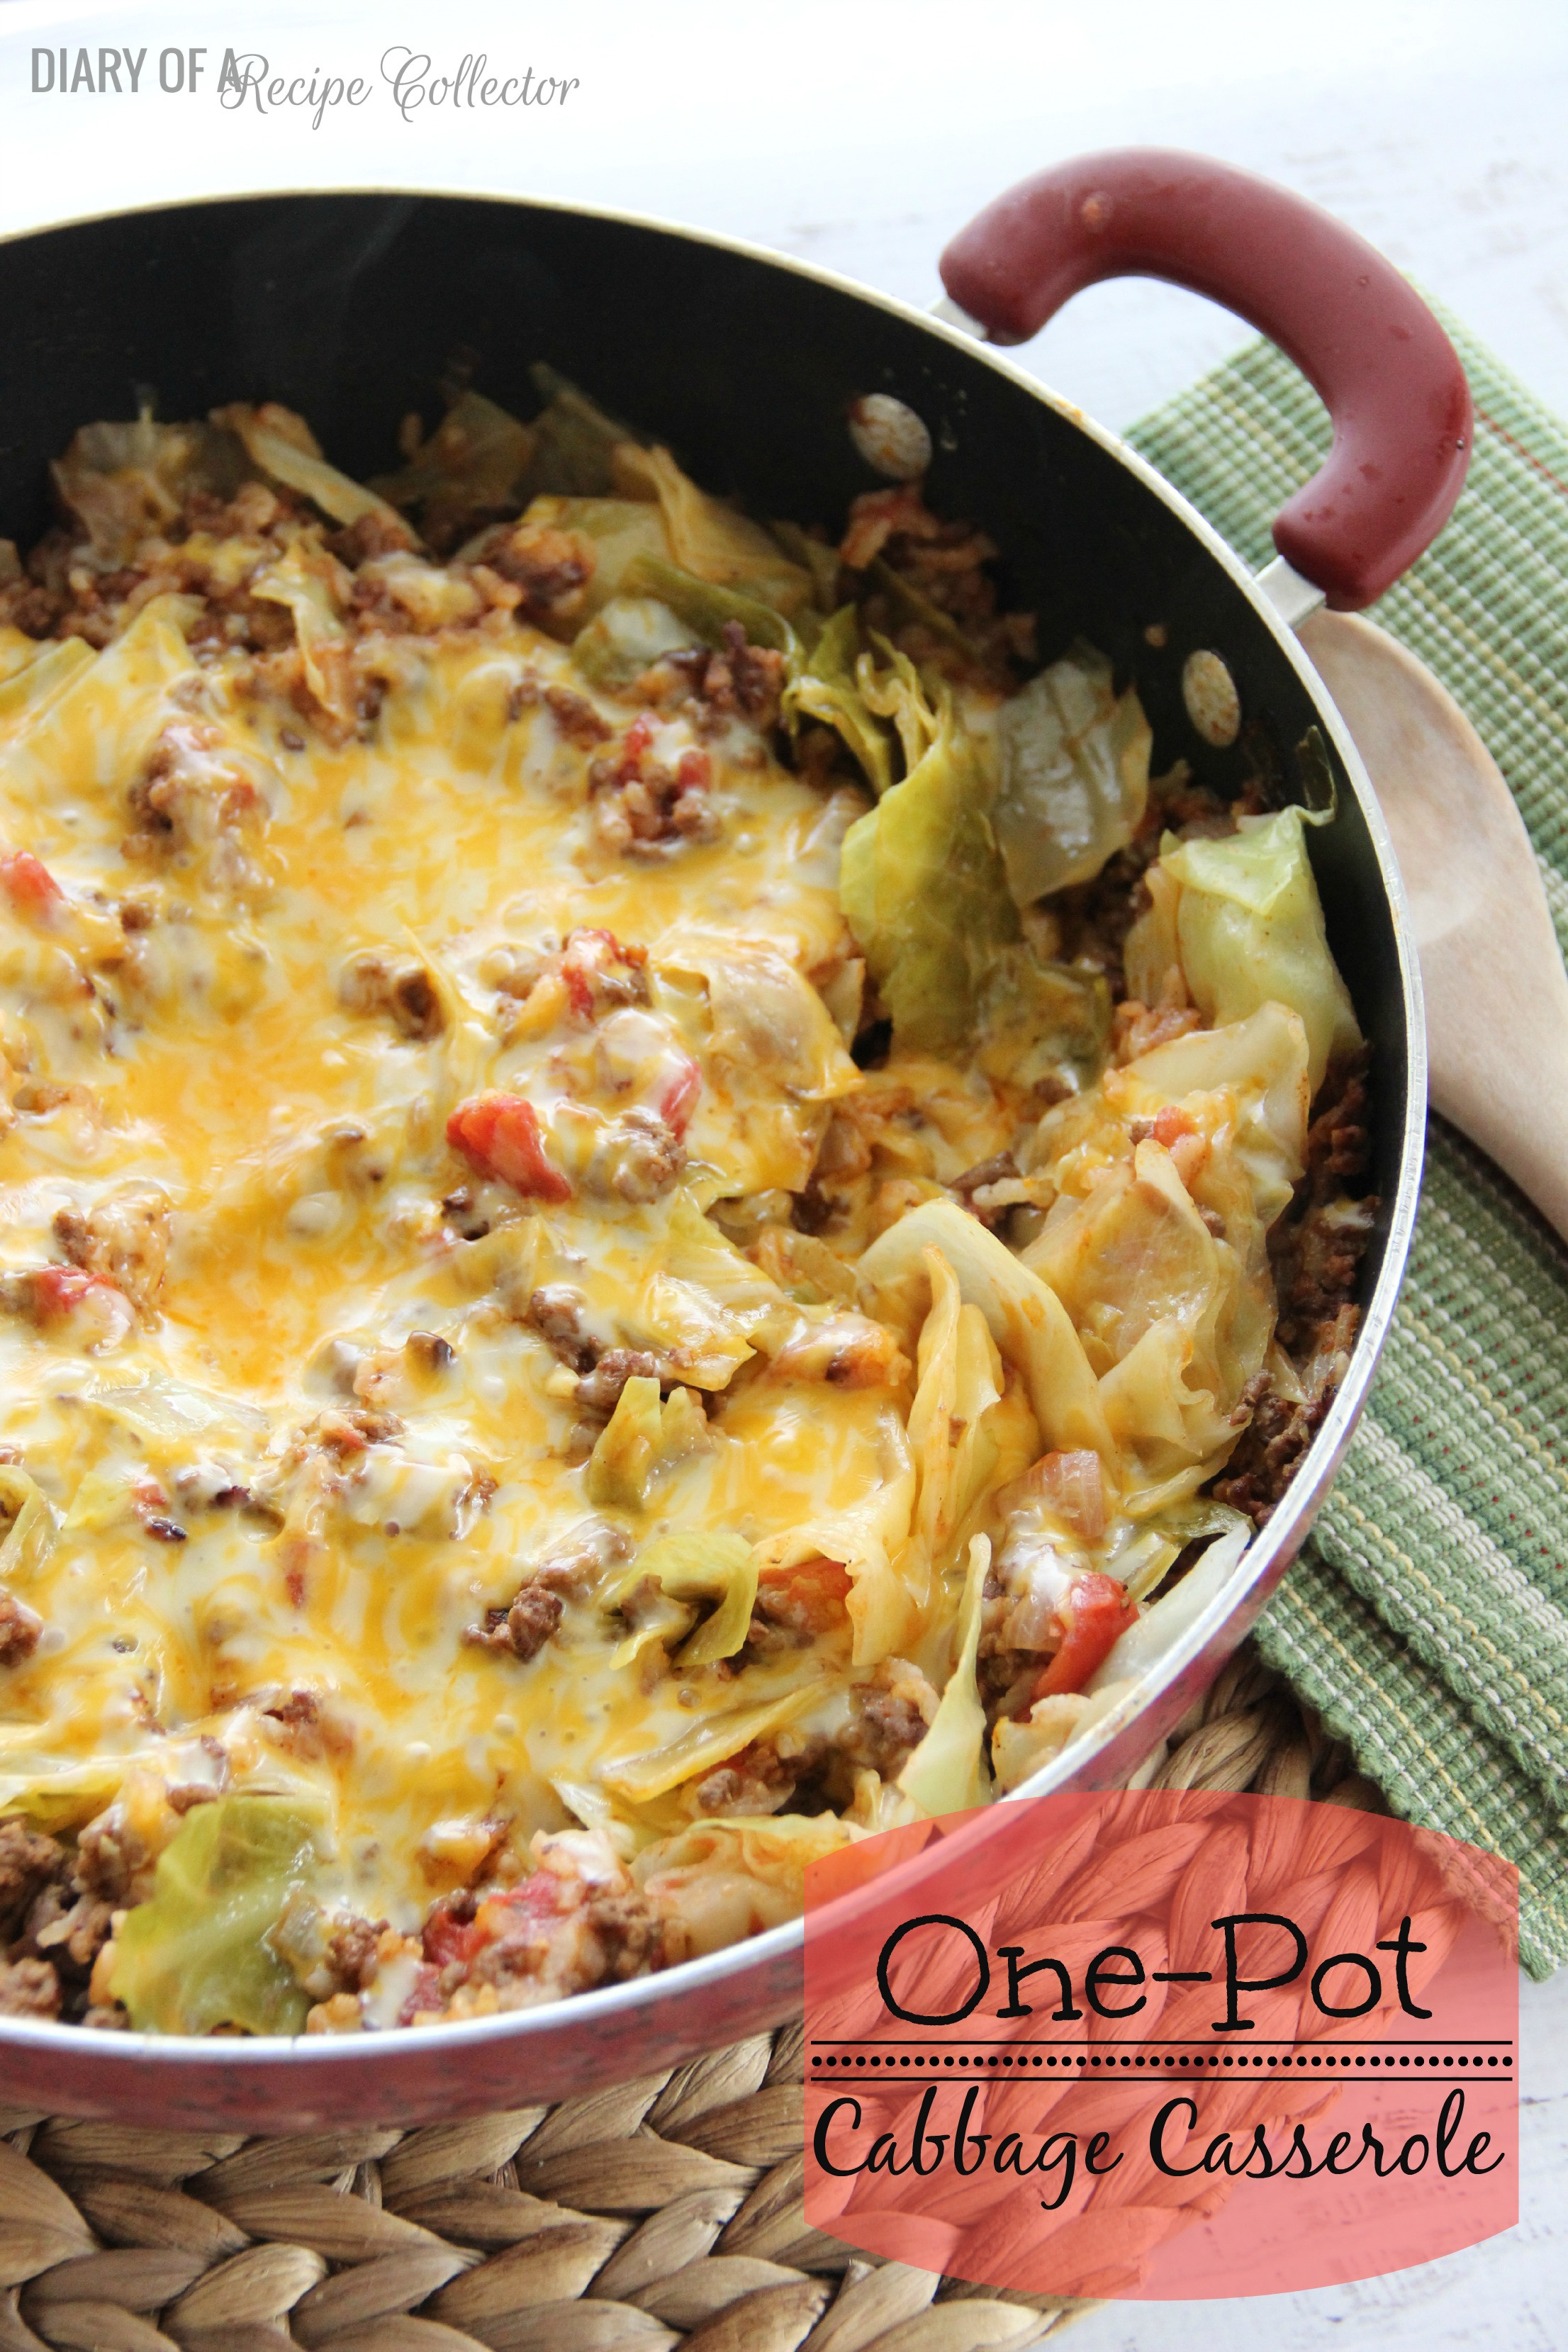 Ground Beef And Cabbage Casserole
 e Pot Cabbage Casserole Diary of A Recipe Collector